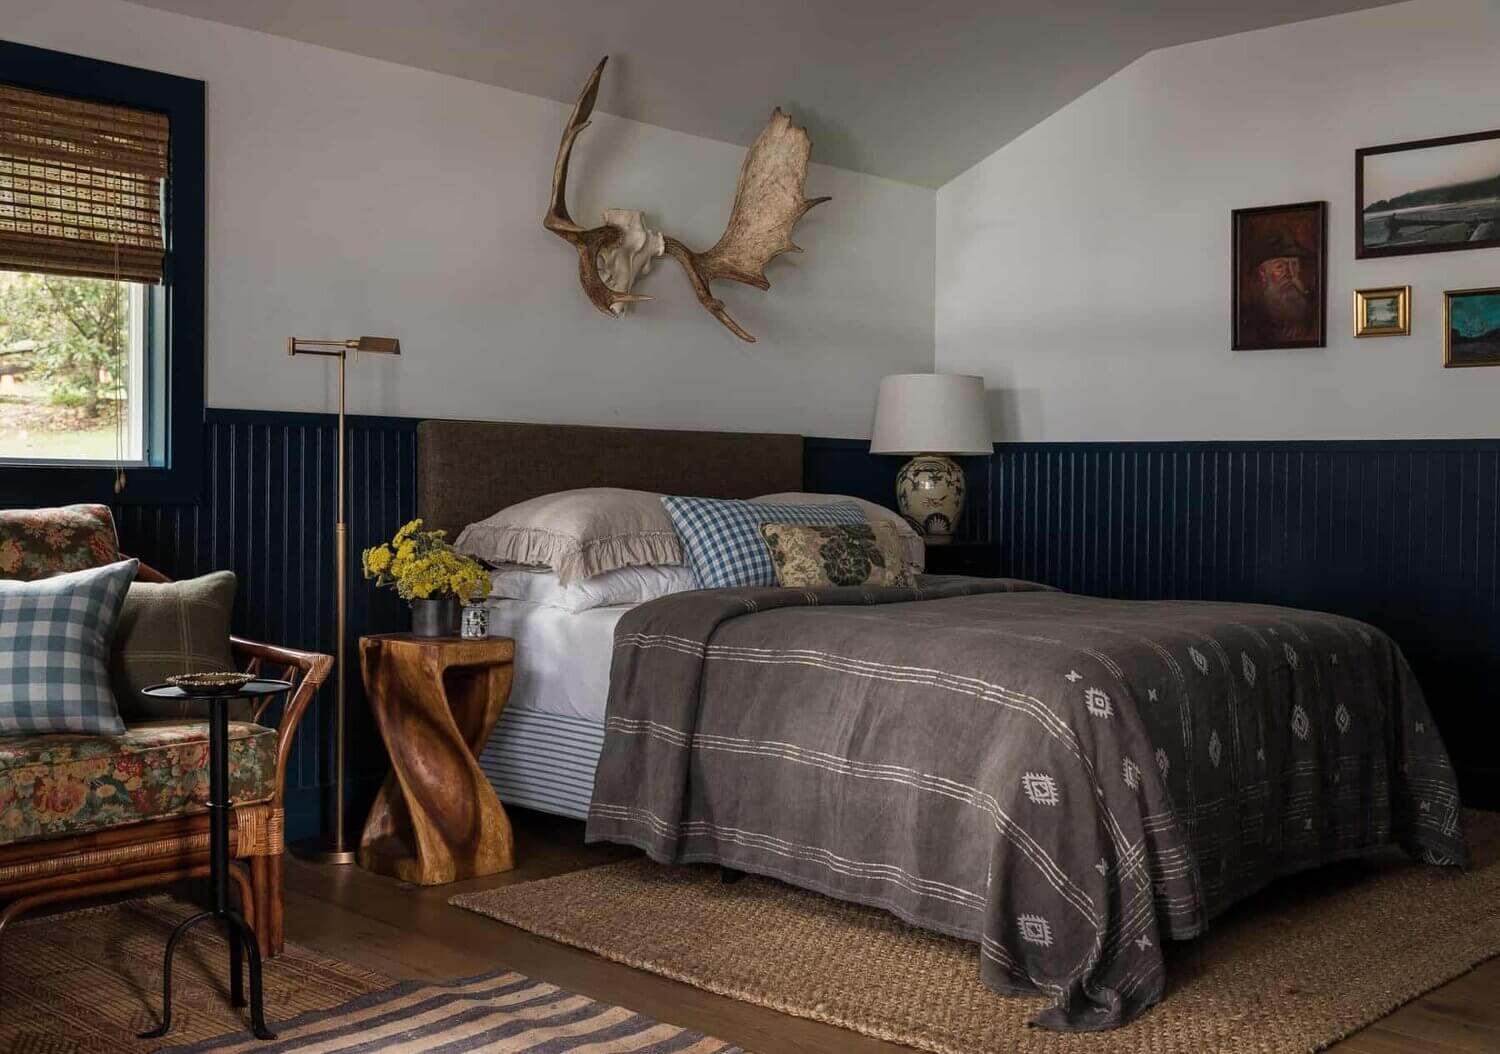 AMoodyCabinandSnugDesignedbyHeidiCaillier TheNordroom44 A Moody Cabin and Snug Designed by Heidi Caillier